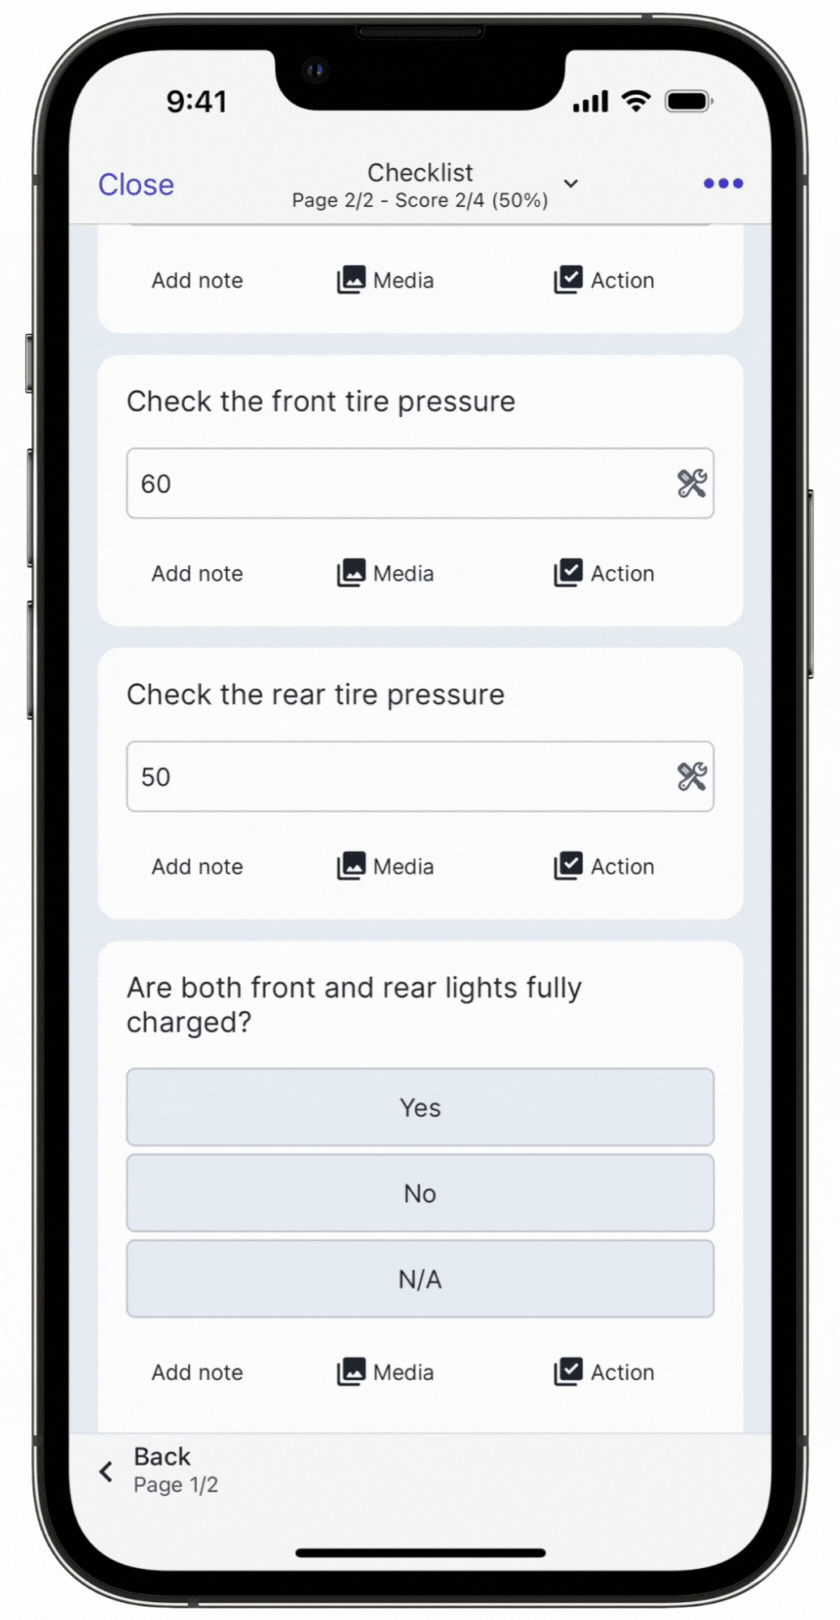 Create an action in an inspection report via the mobile app.